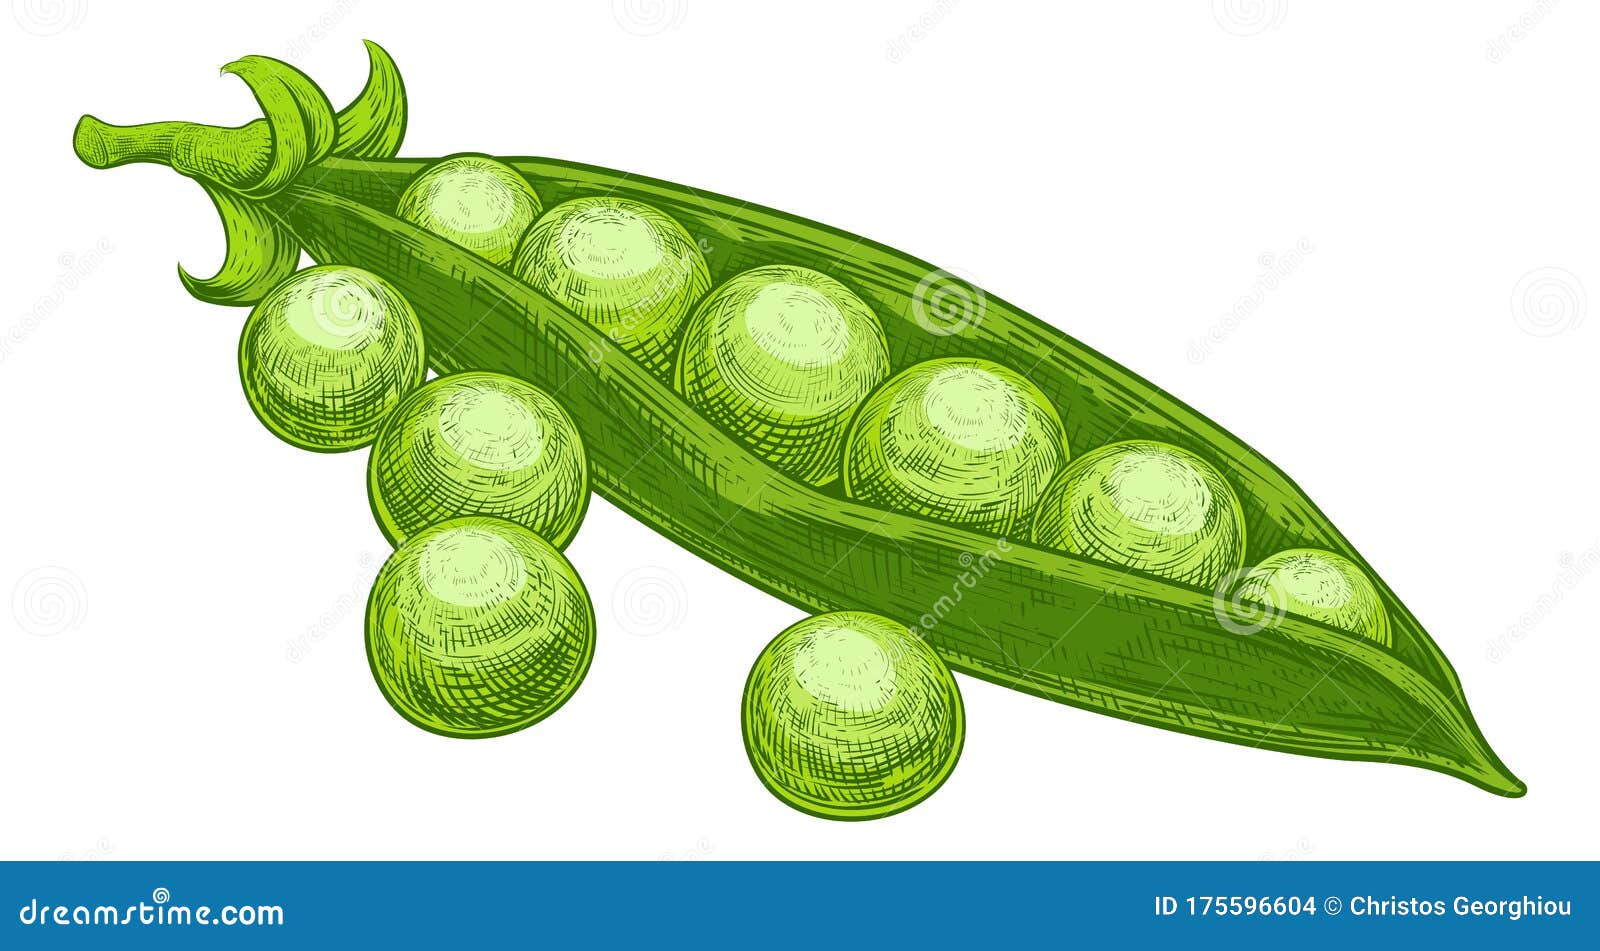 Download Peas Garden Green Sweet And Pod Vintage Woodcut Stock ...